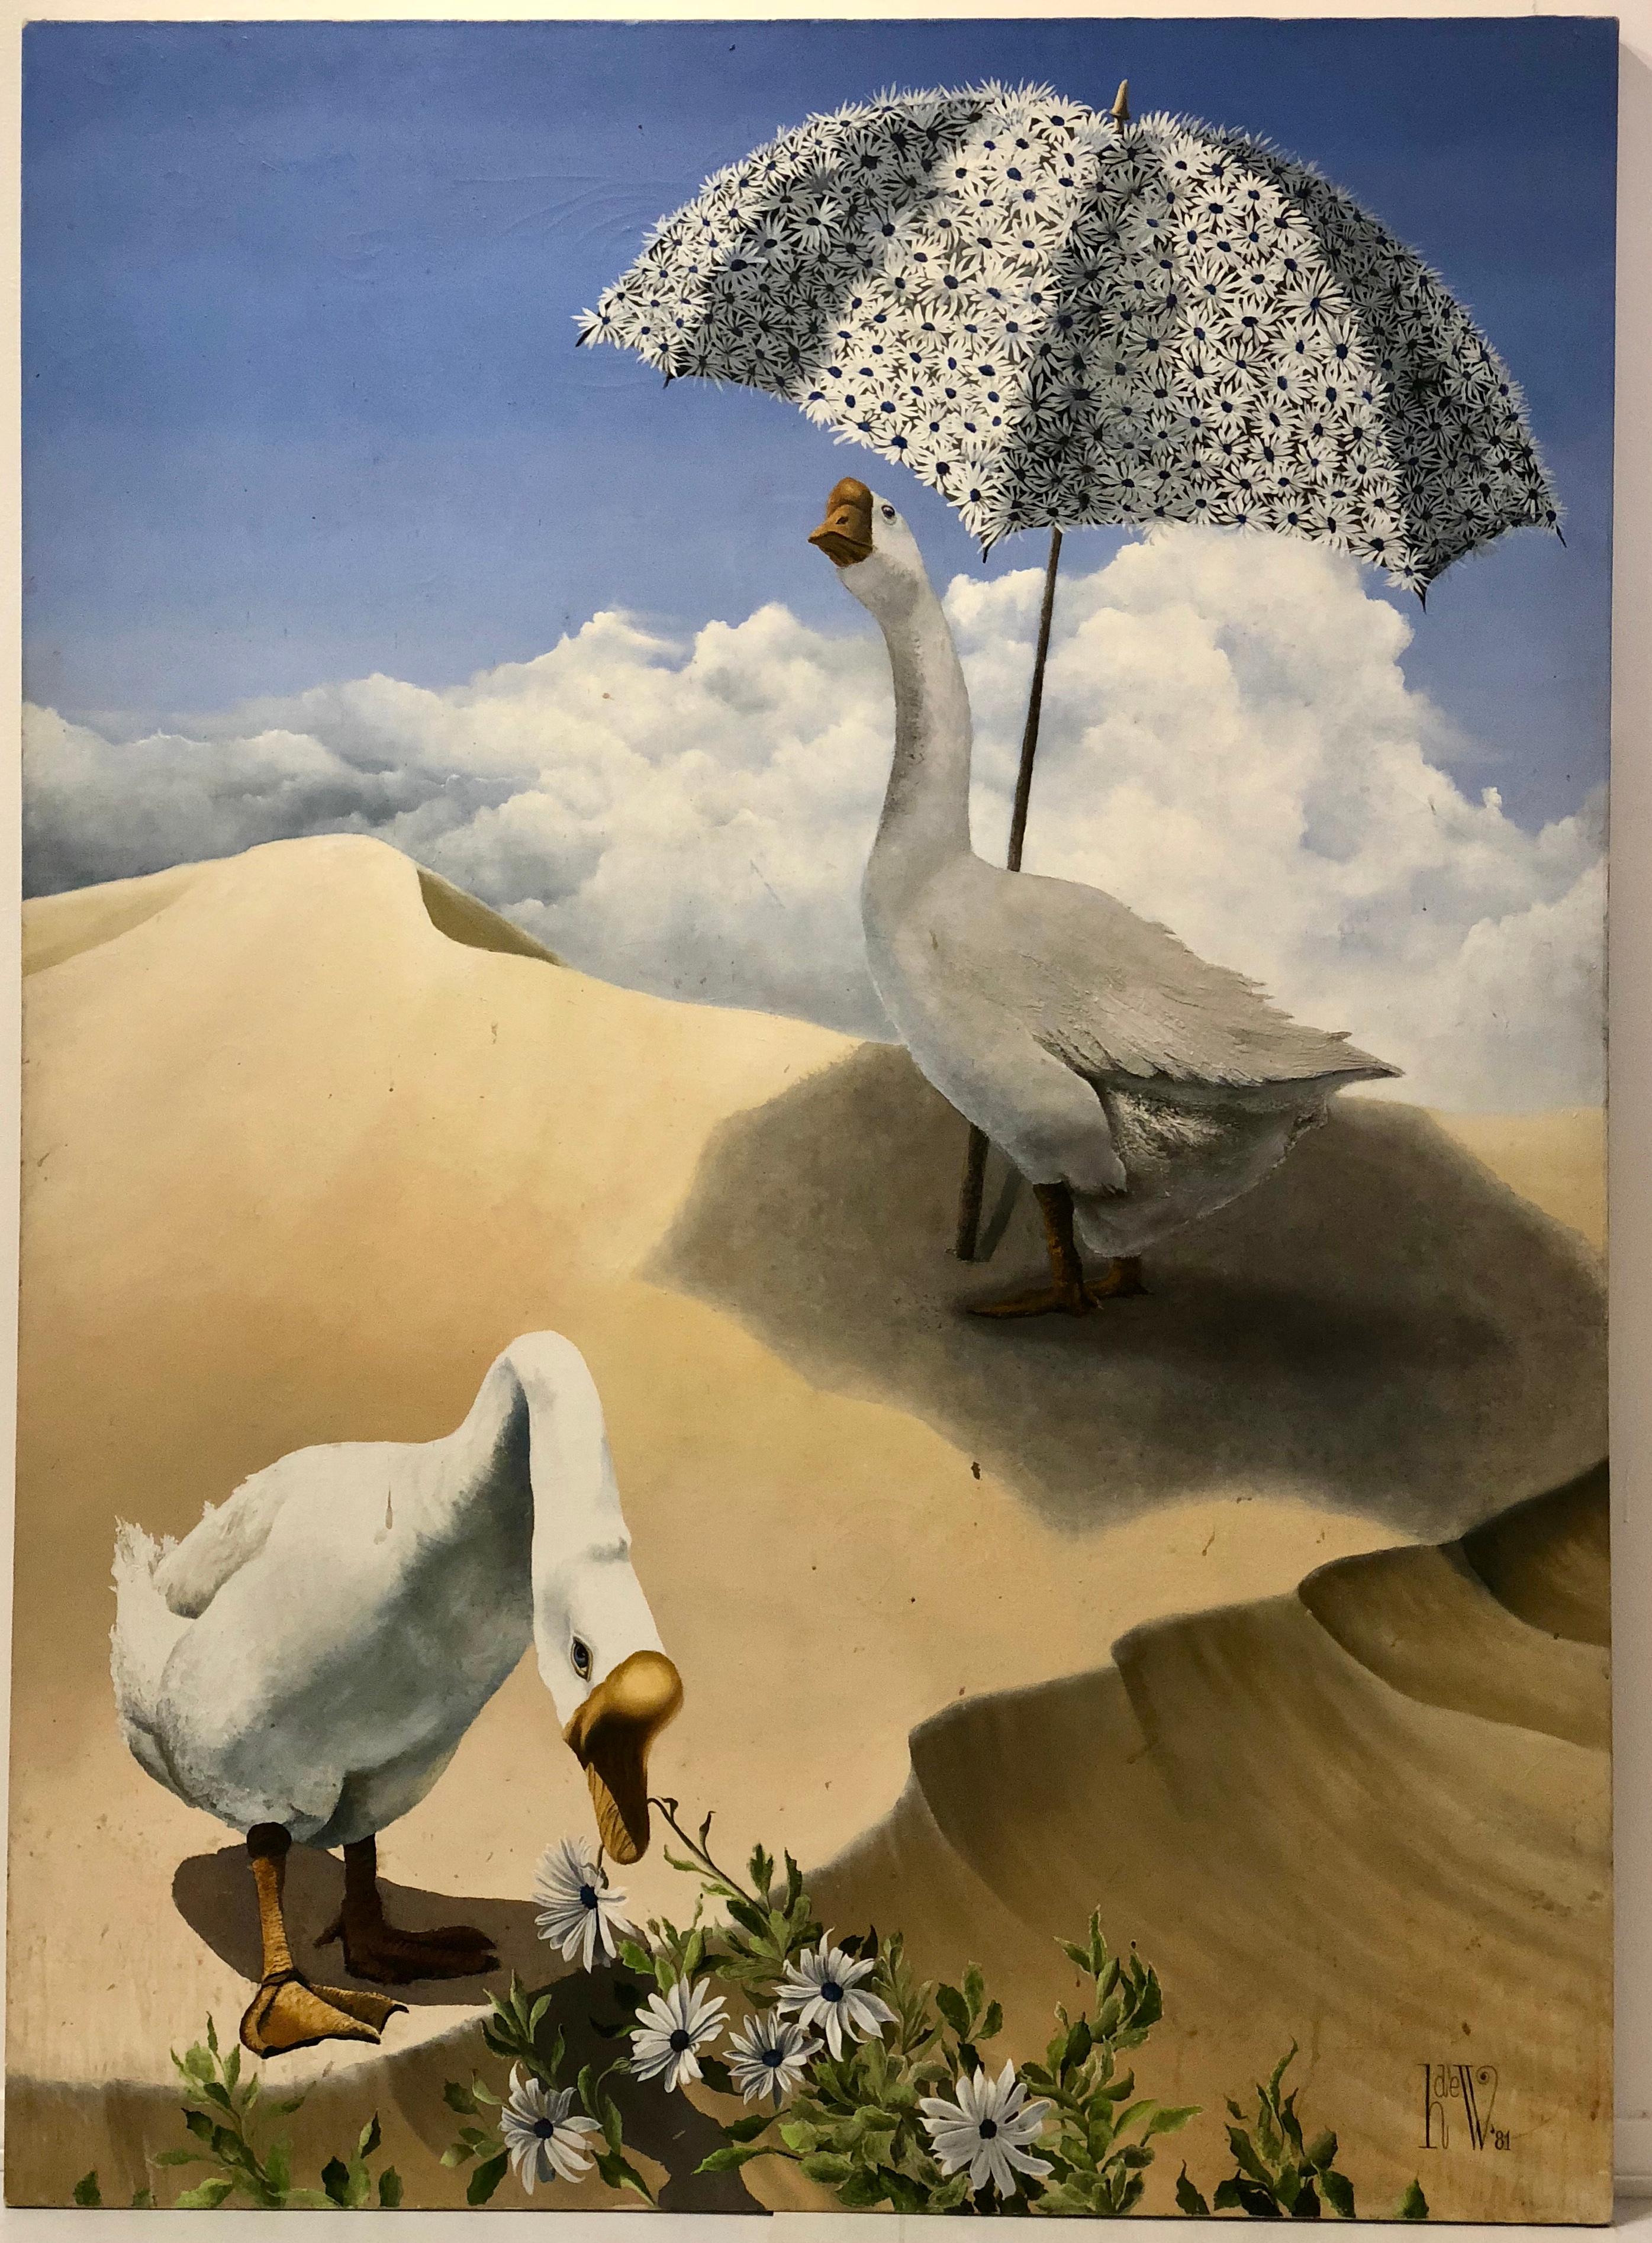 Beautiful large surrealistic painting, by listed artist Helen H . de Werd circa 1981 nice subject well done piece nice large size.